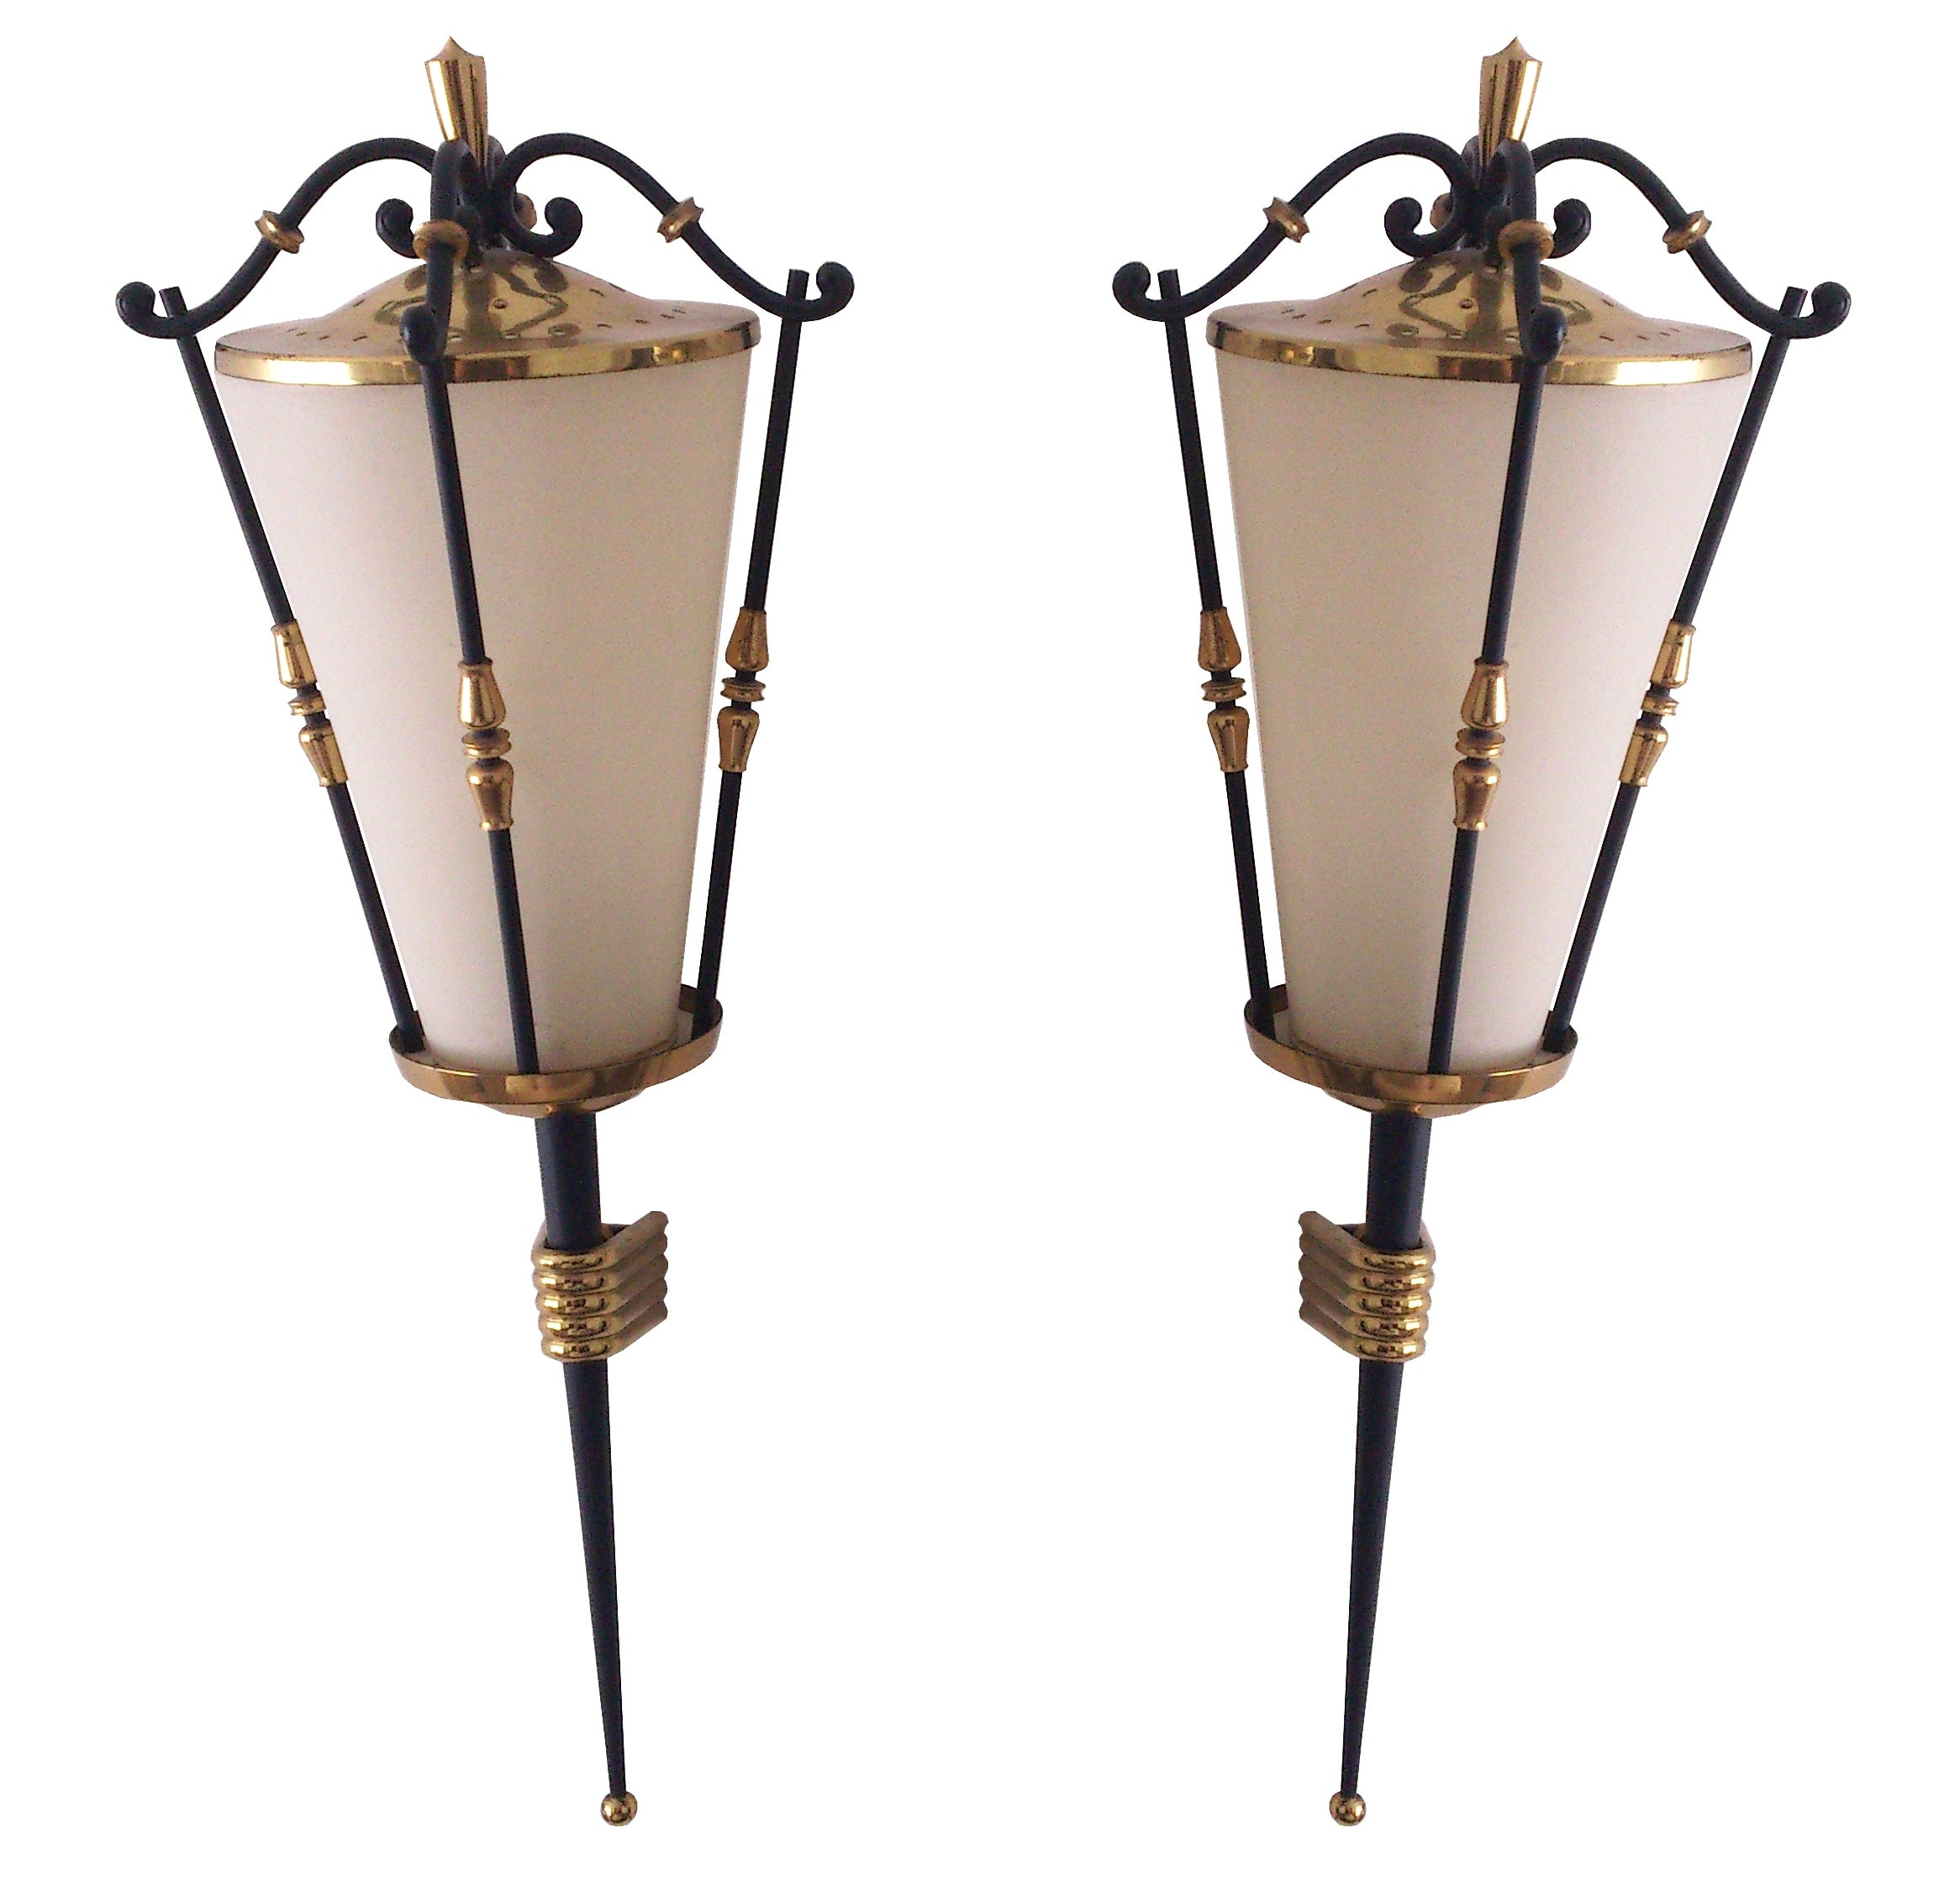 Pair of Mid Century Brass and Black Enamel Sconces by Arlus